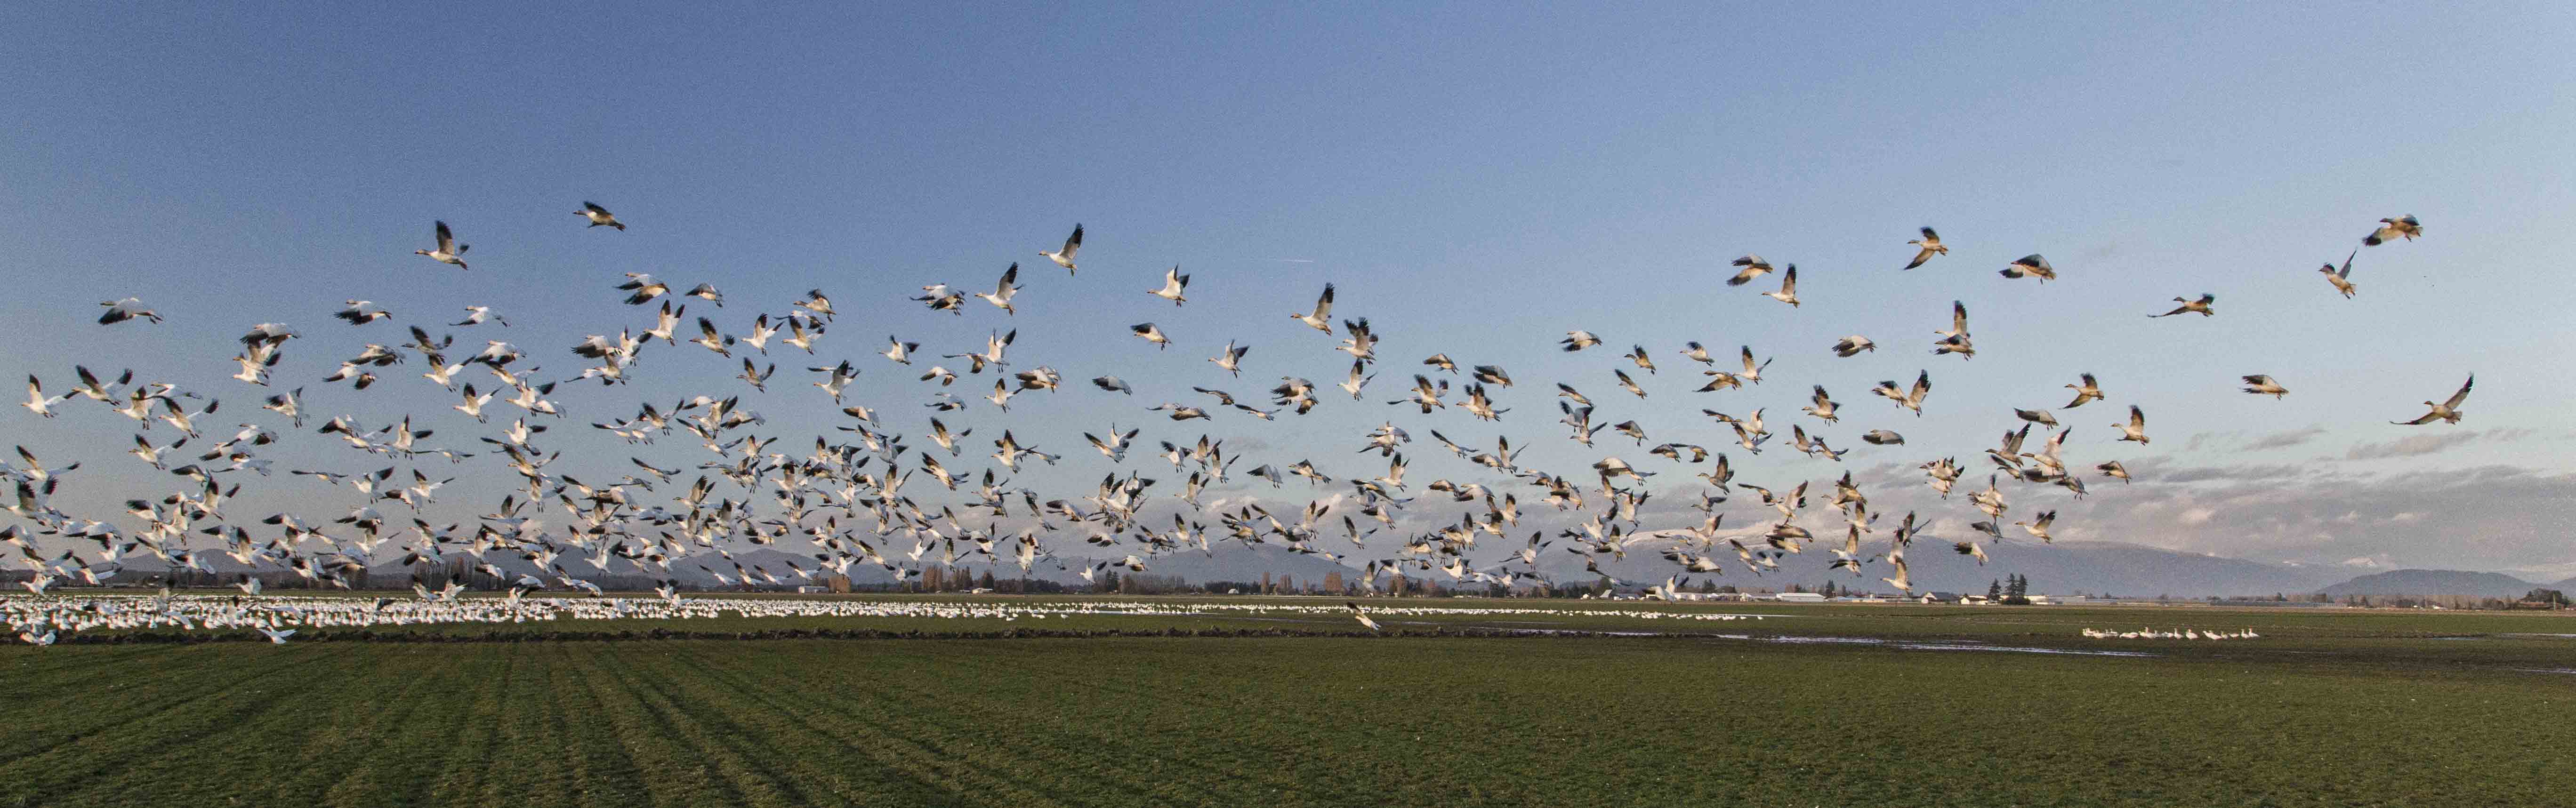 snow geese take flight over a field